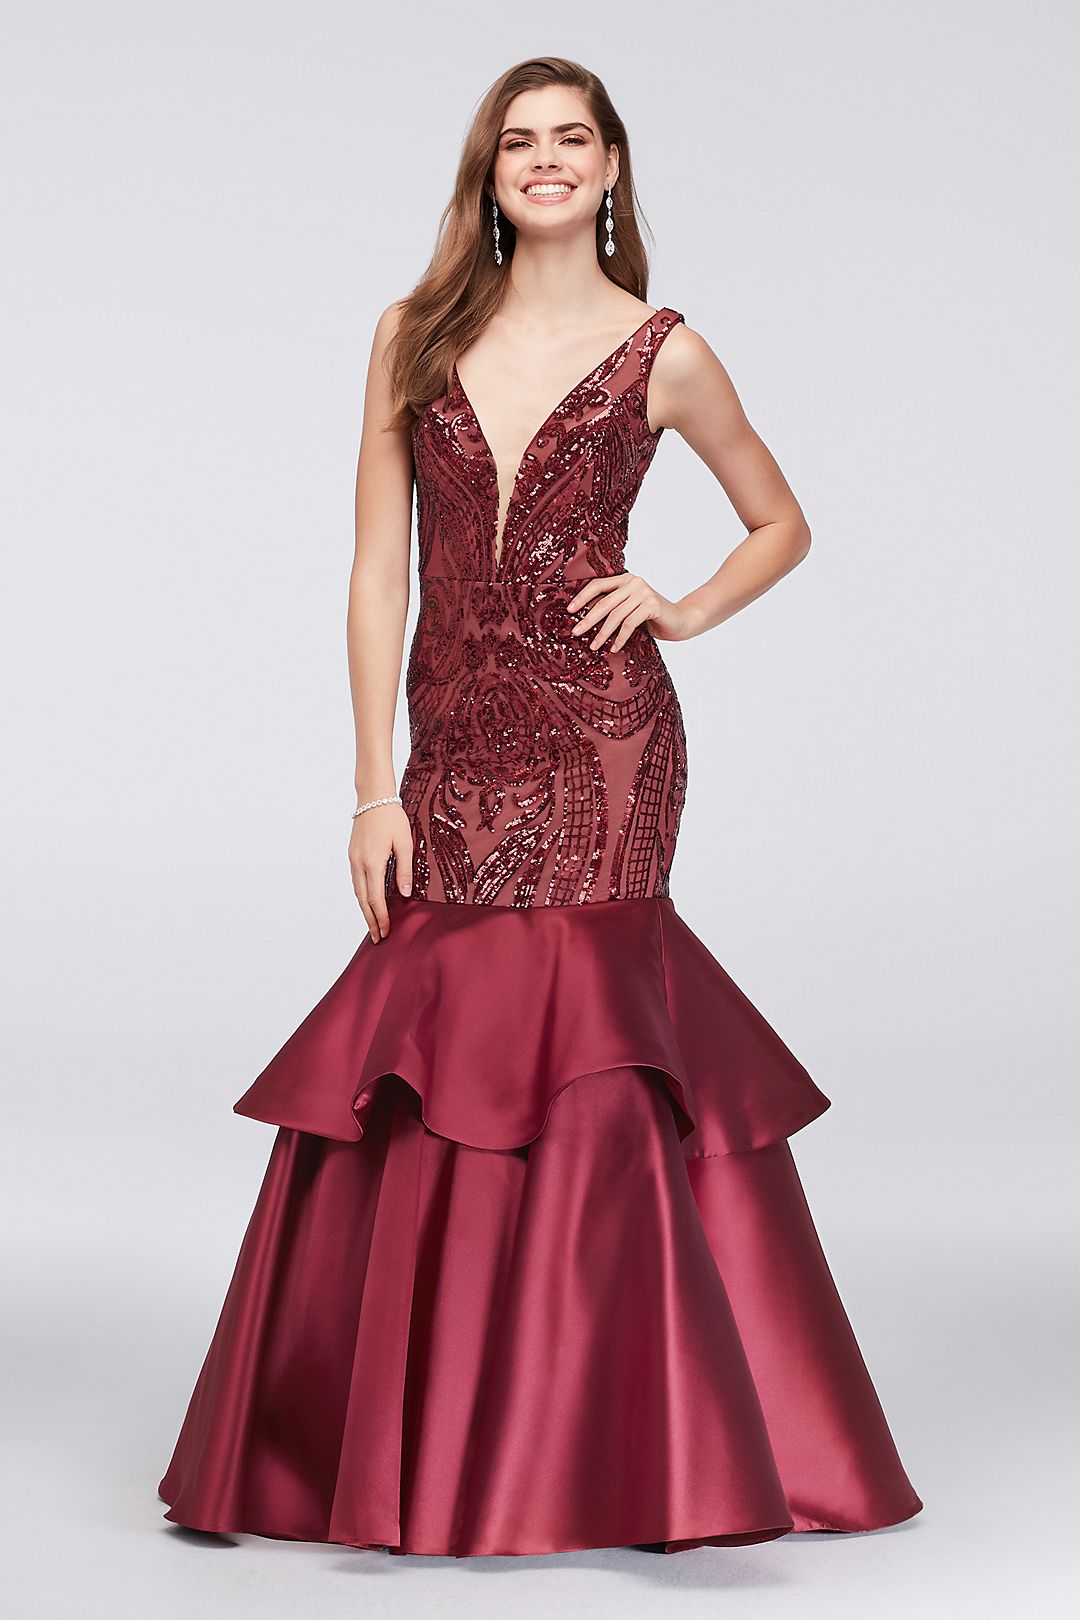 Mermaid Sequined Gown with Tiered Mikado Skirt Image 1